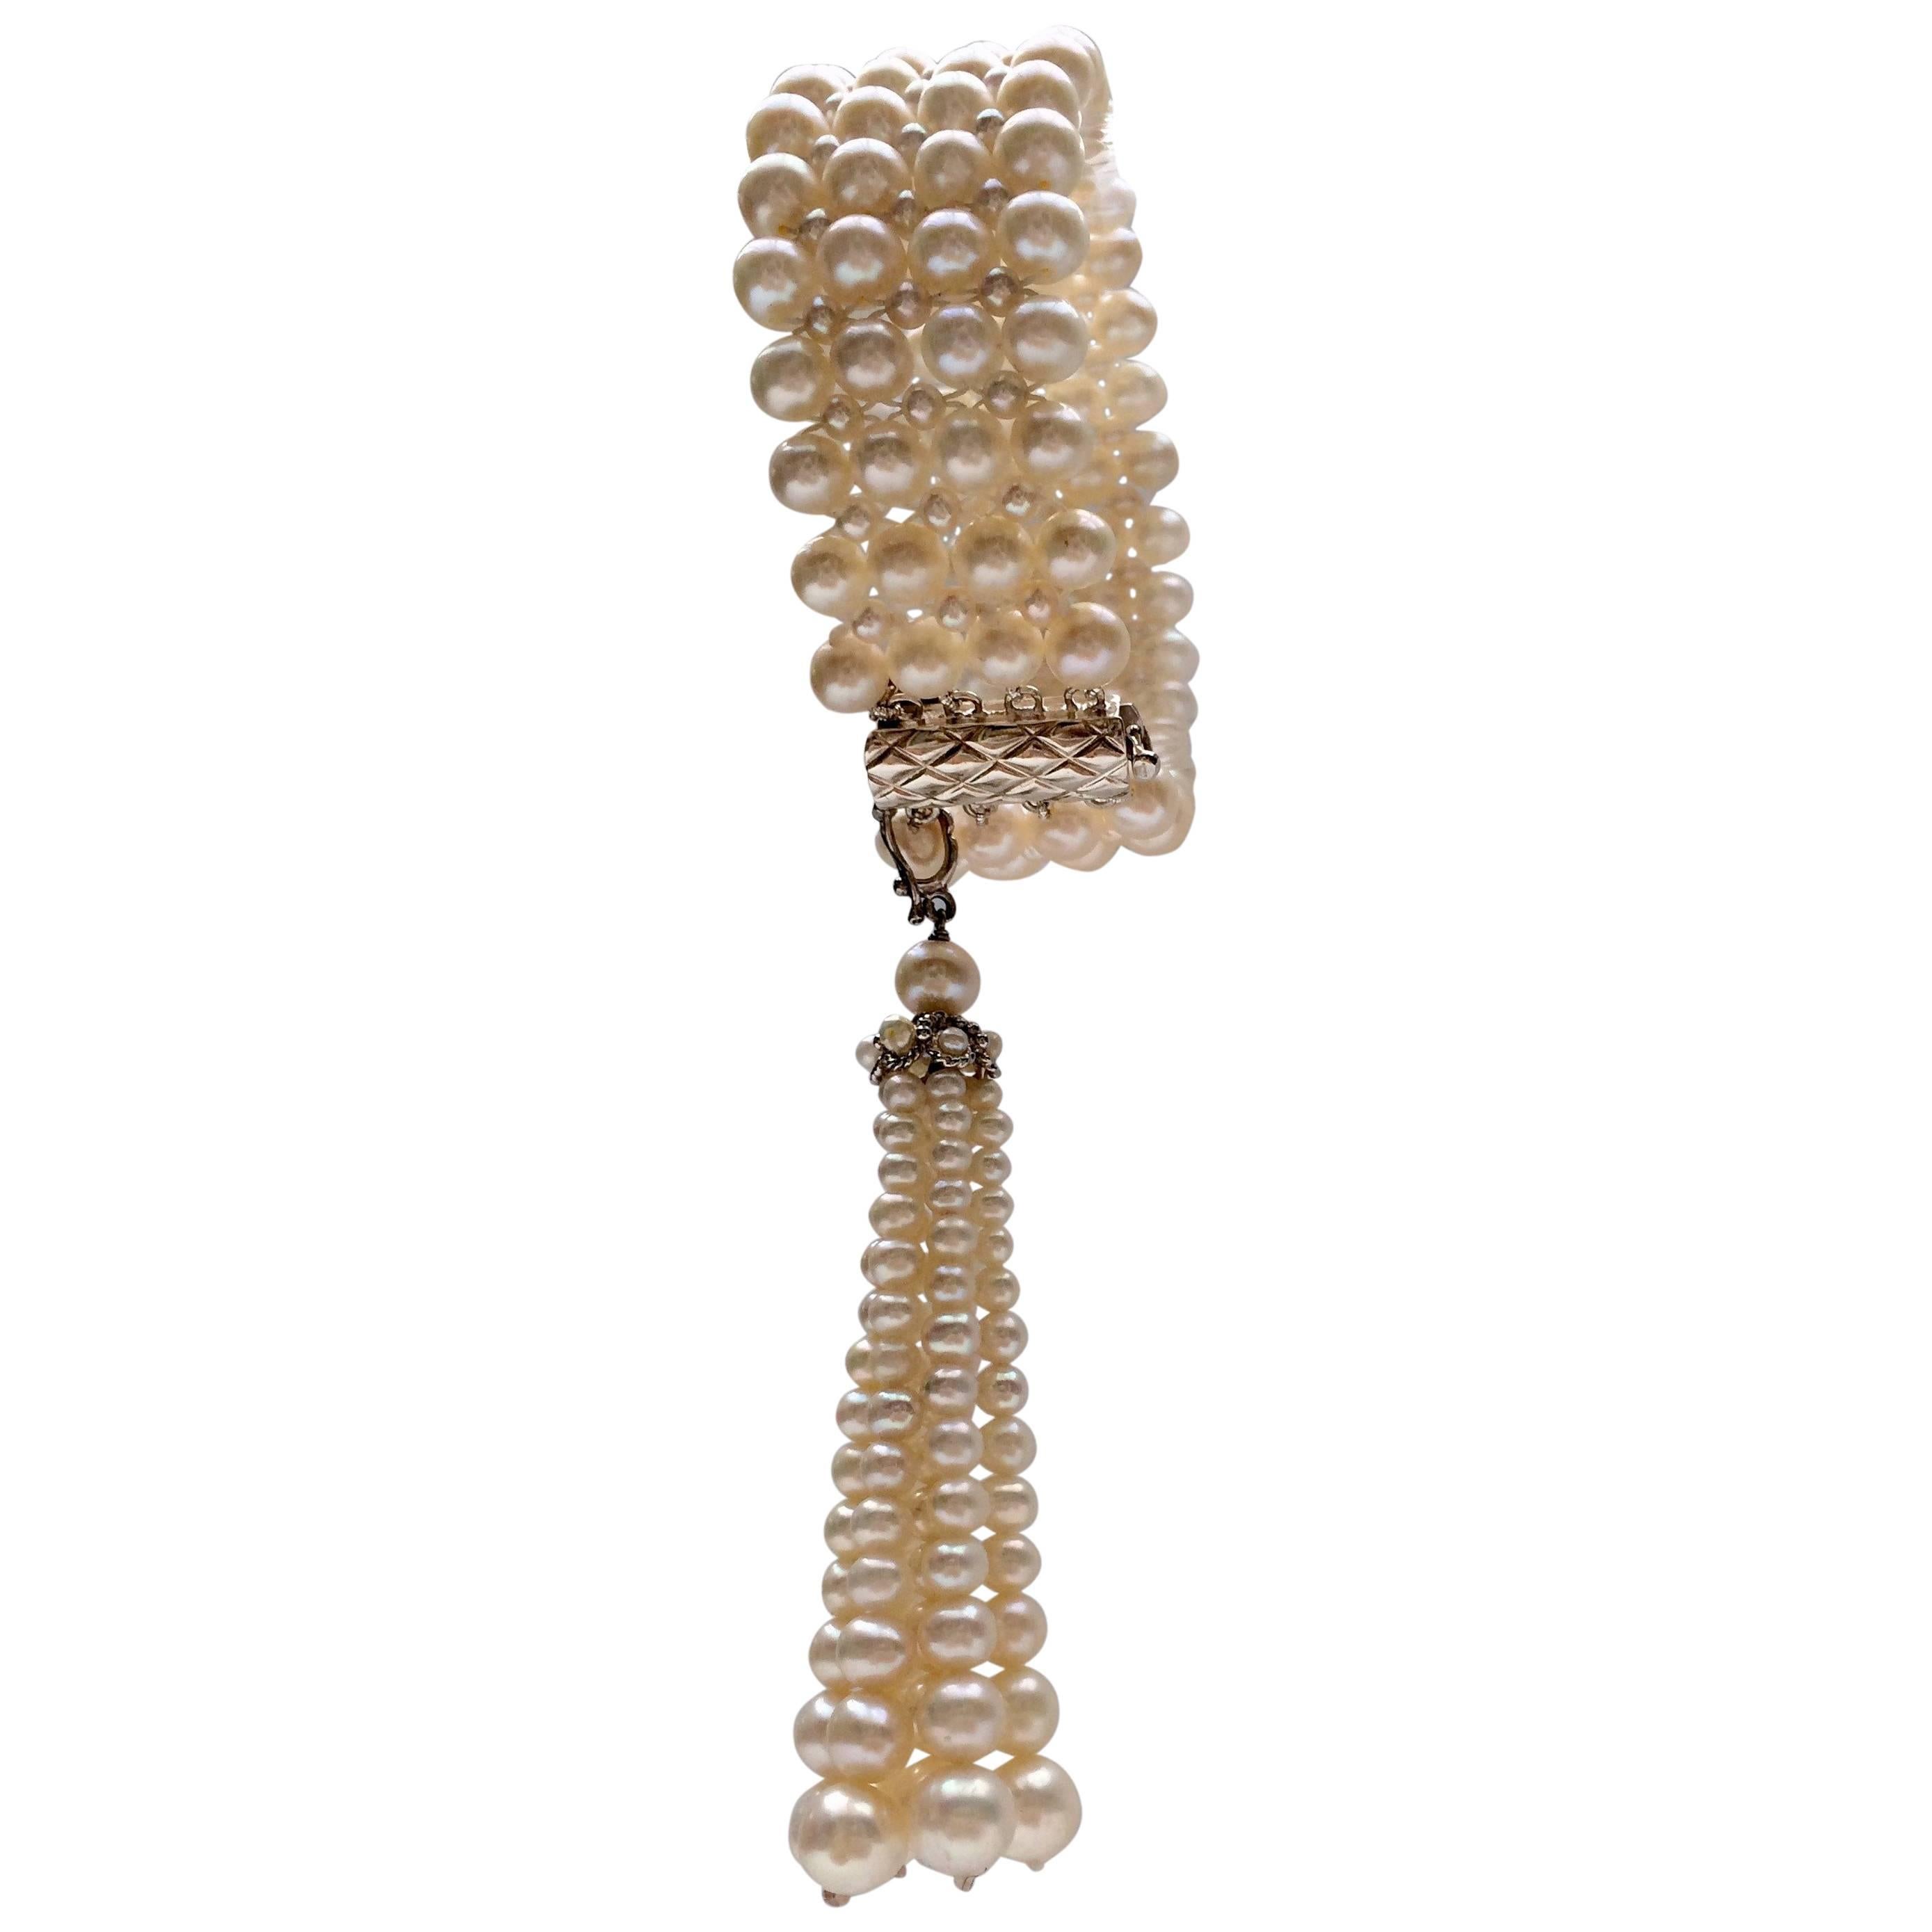  Woven Pearl Art Deco Bracelet with Removable Matching Pearl Tassel by Marina J